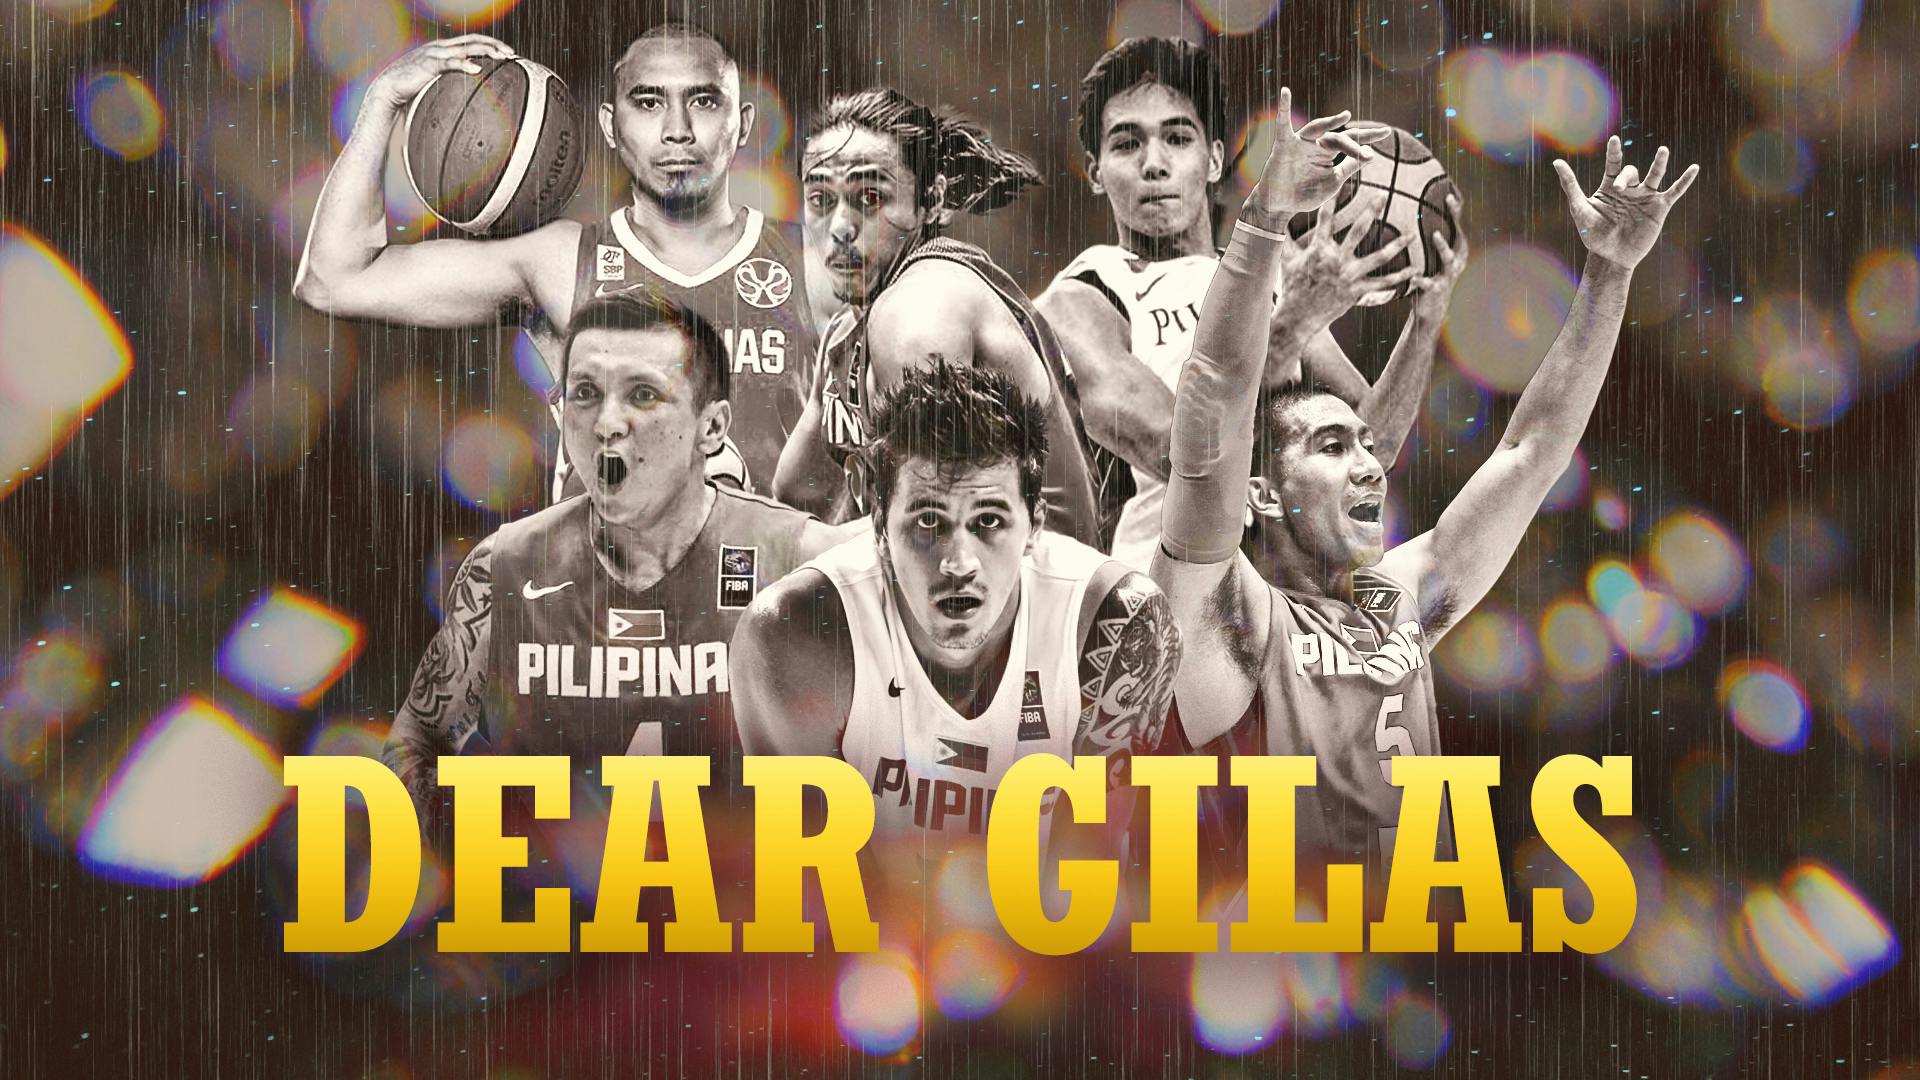 Salamat: An open letter to all Gilas teams who gave their all for country’s pride and honor